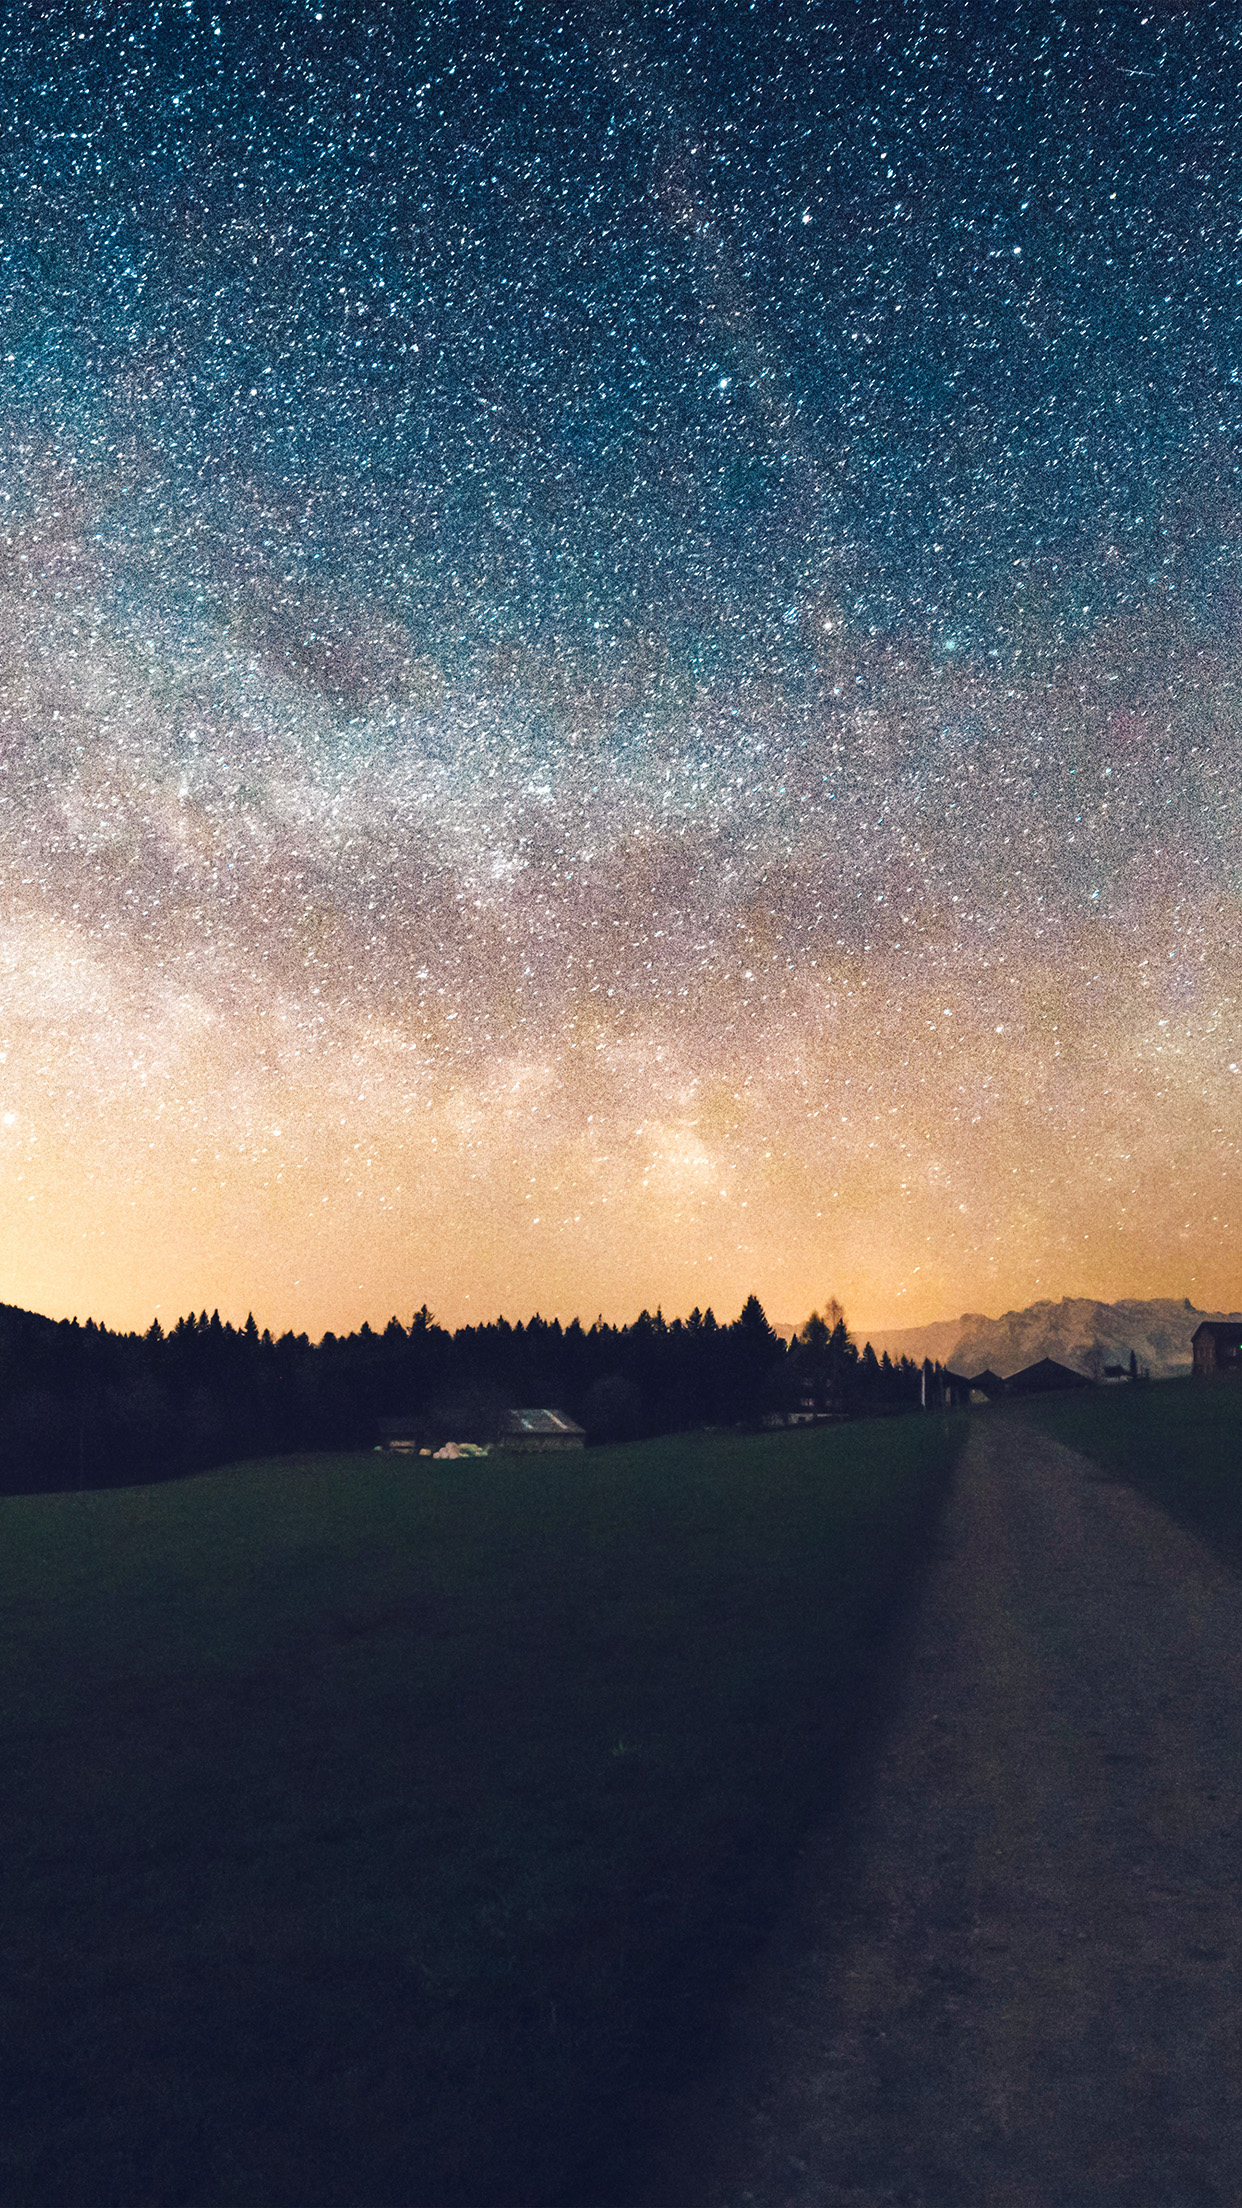 starry-sky-nature-sunset-mountain-road-34-iphone6-plus-wallpaper